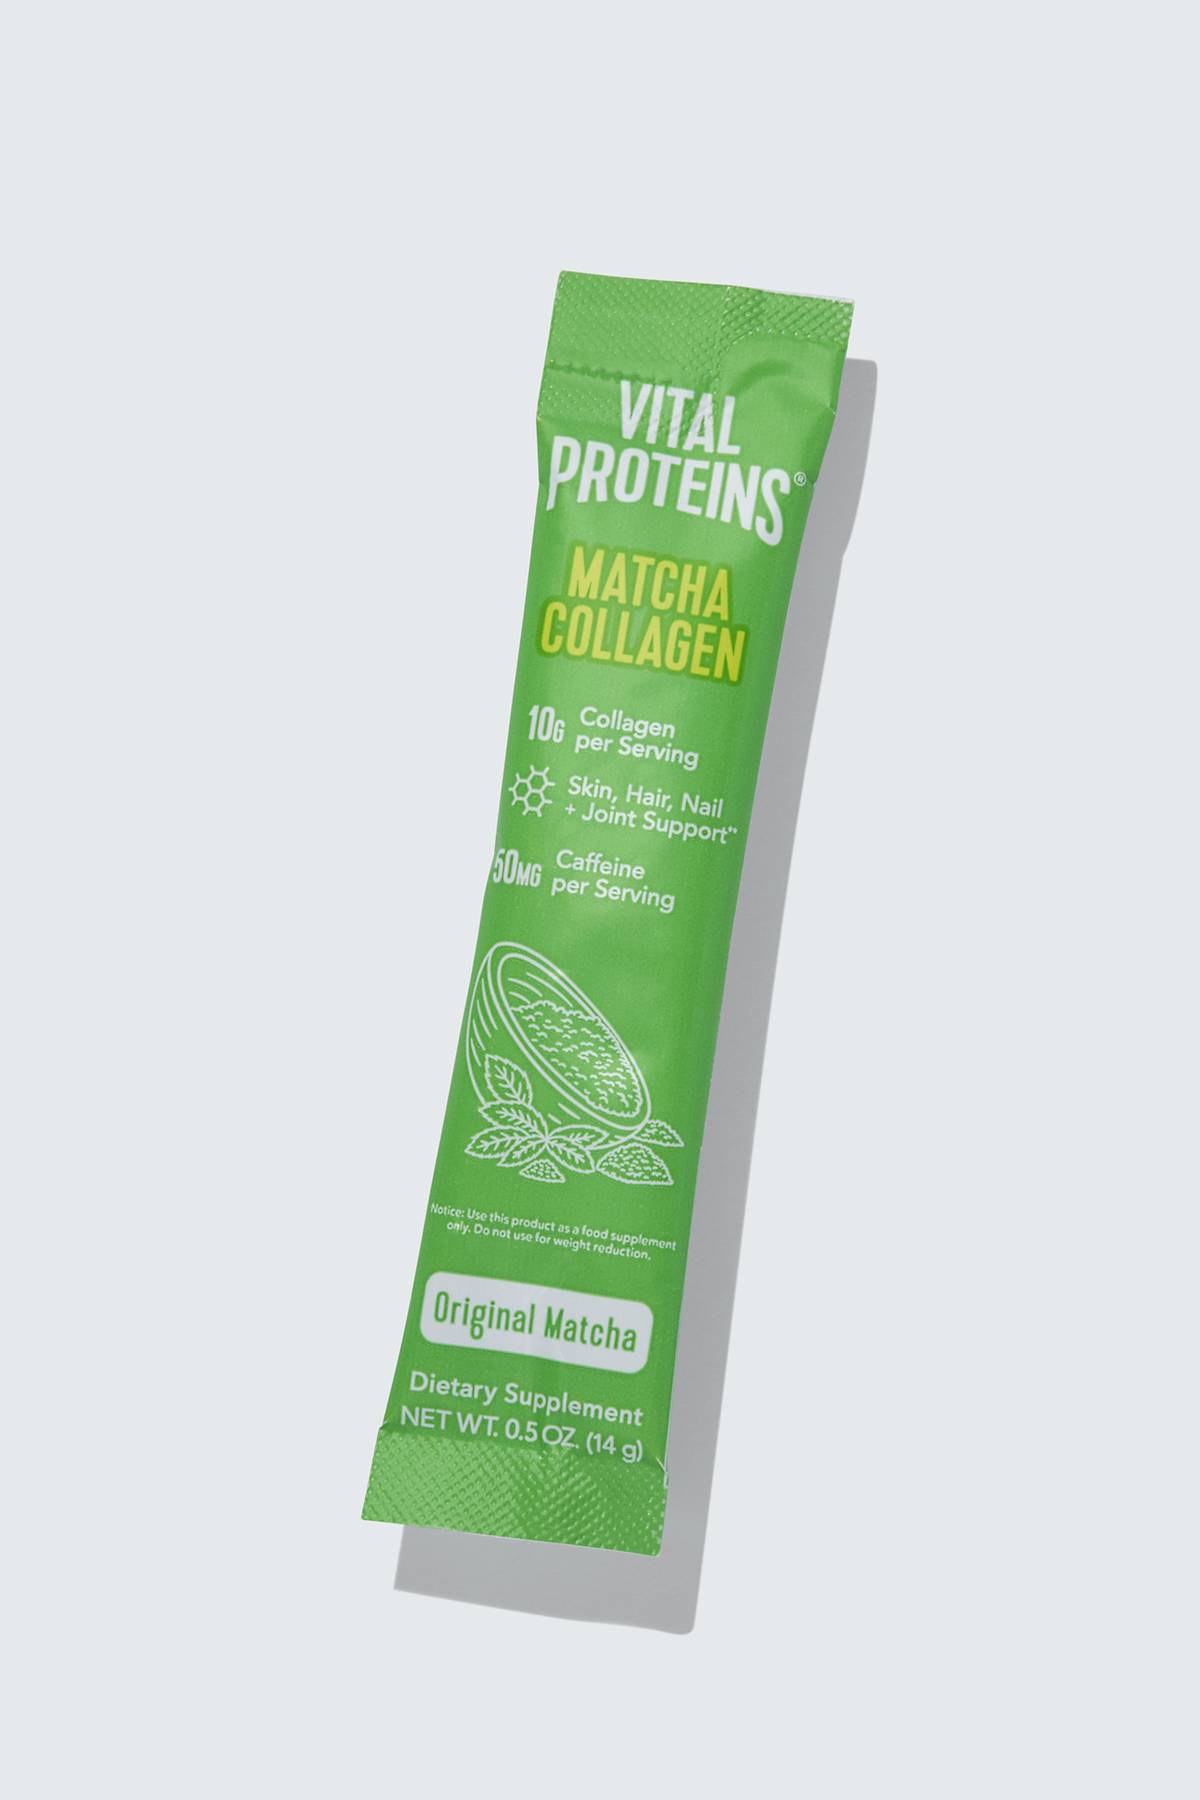 Vital Proteins Matcha Collagen Review! Worth it? 